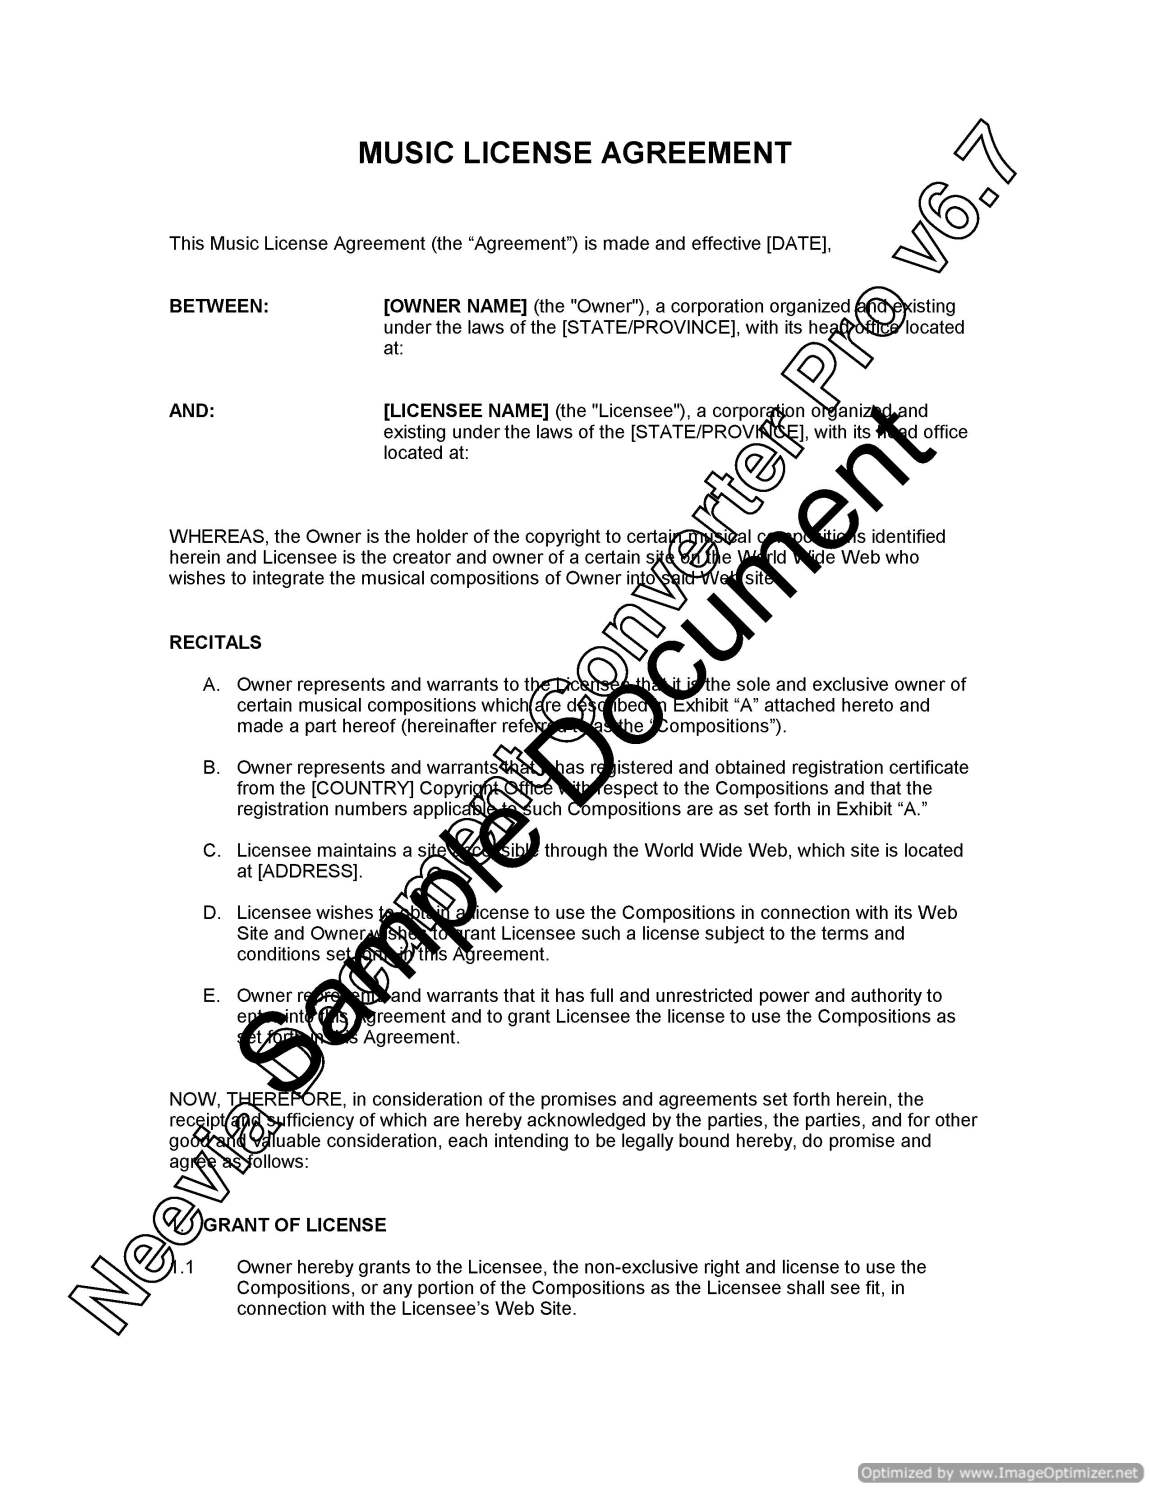 Music Rights Agreement Music License Agreement